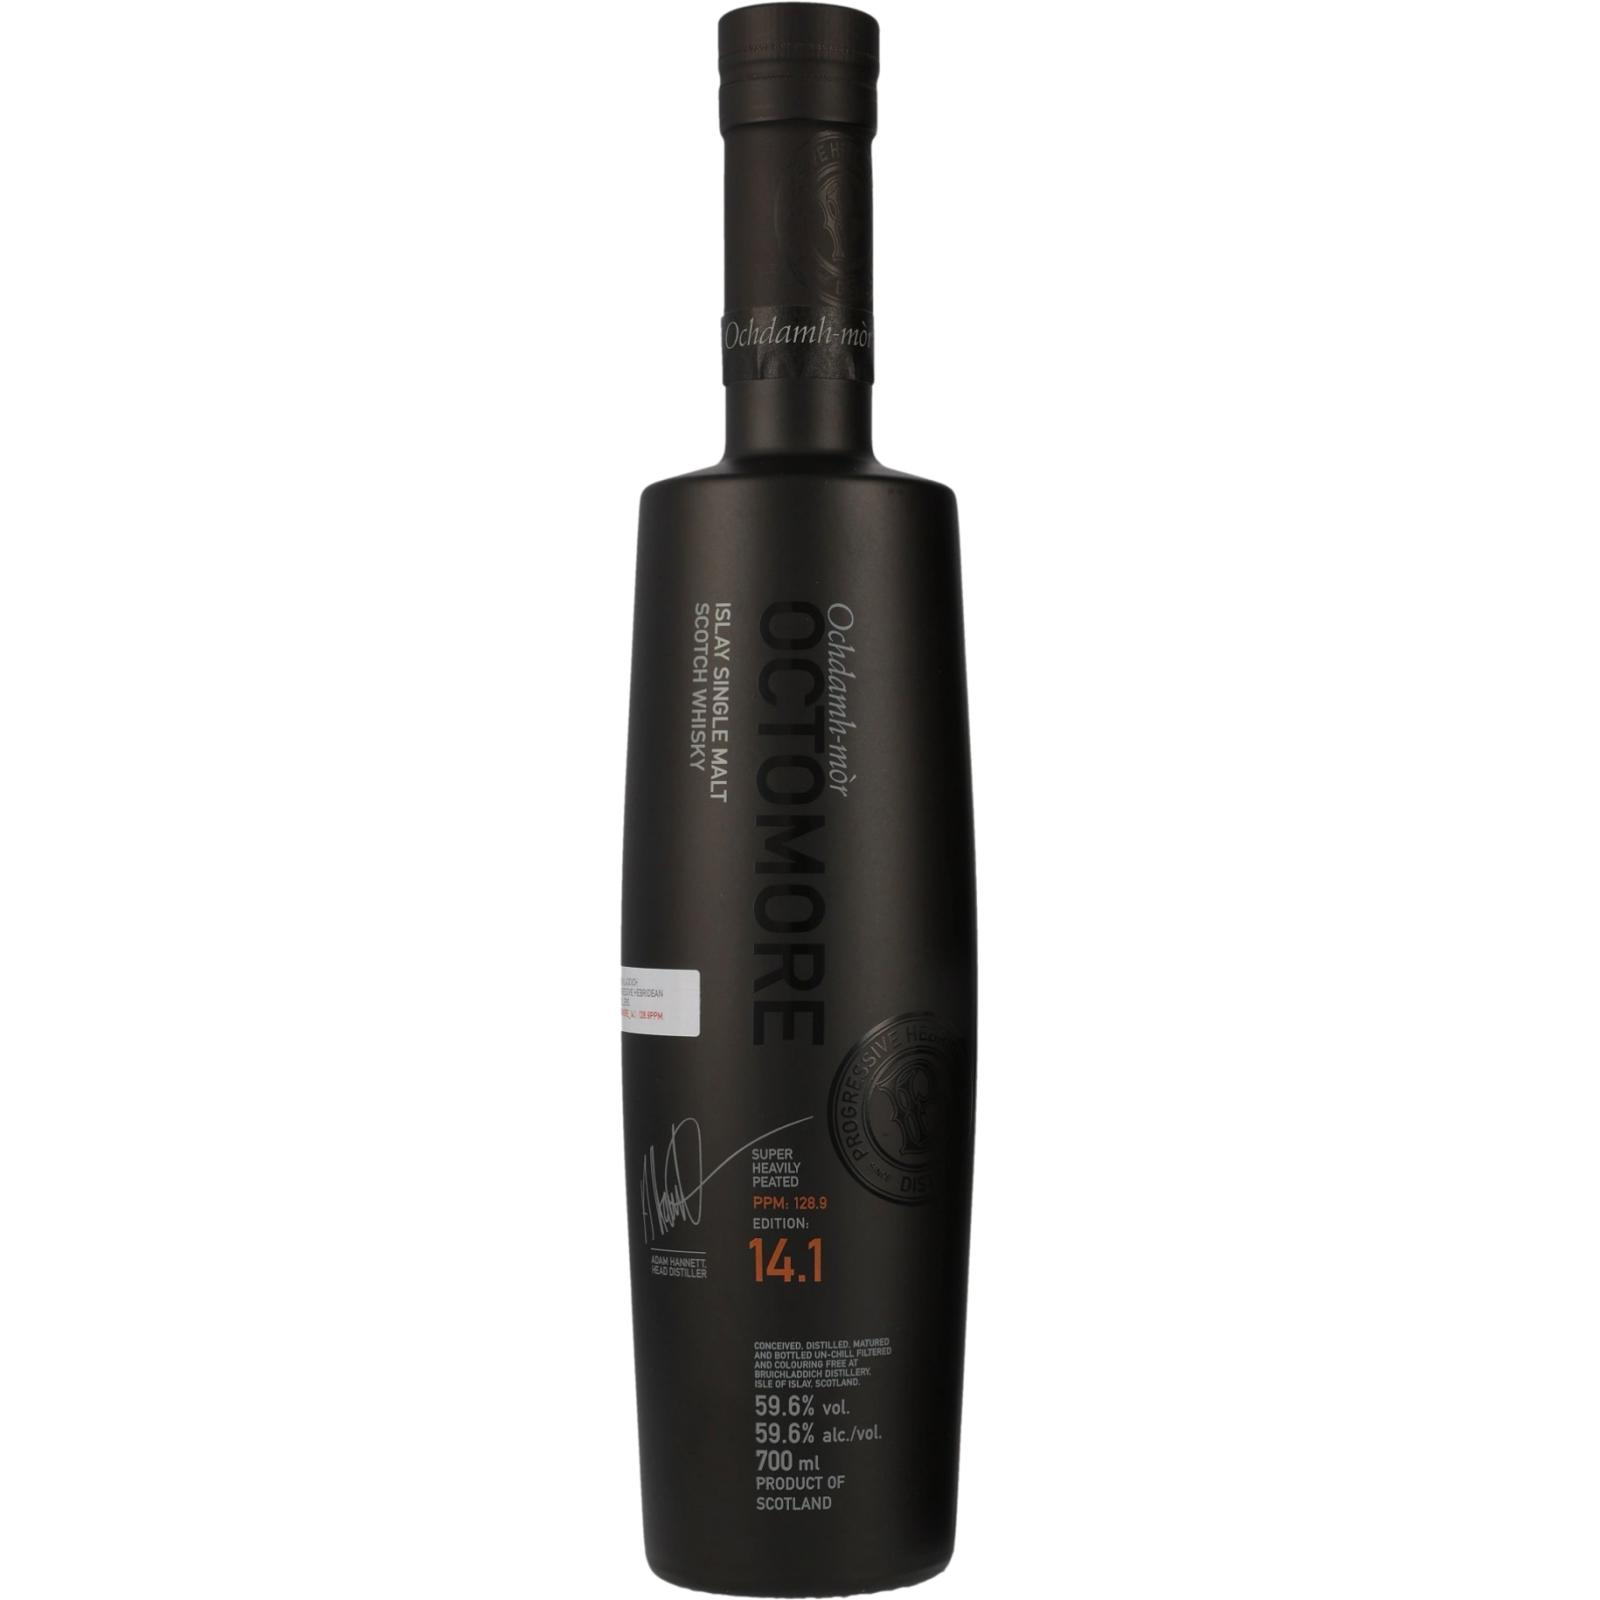 Read more about the article Octomore 14.1